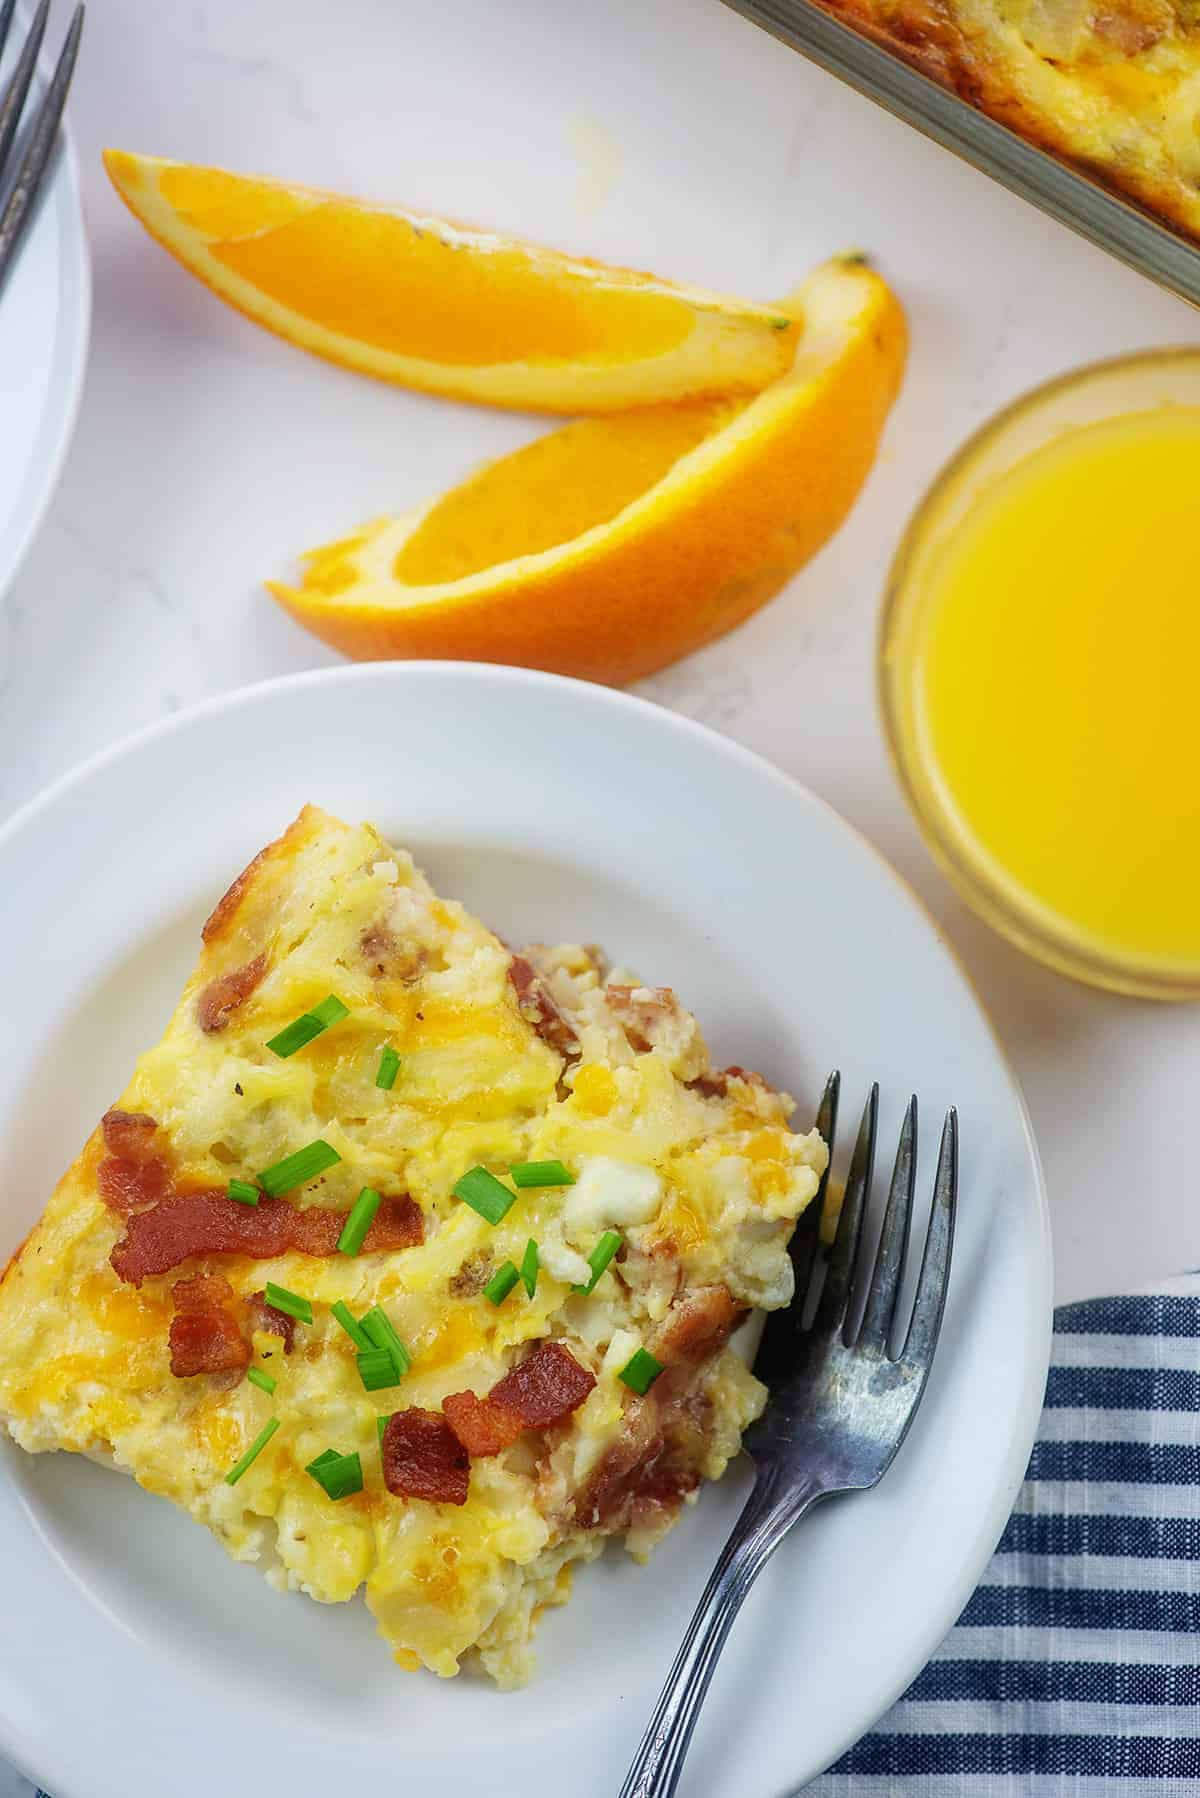 Amish breakfast casserole recipe on white plate with oranges.